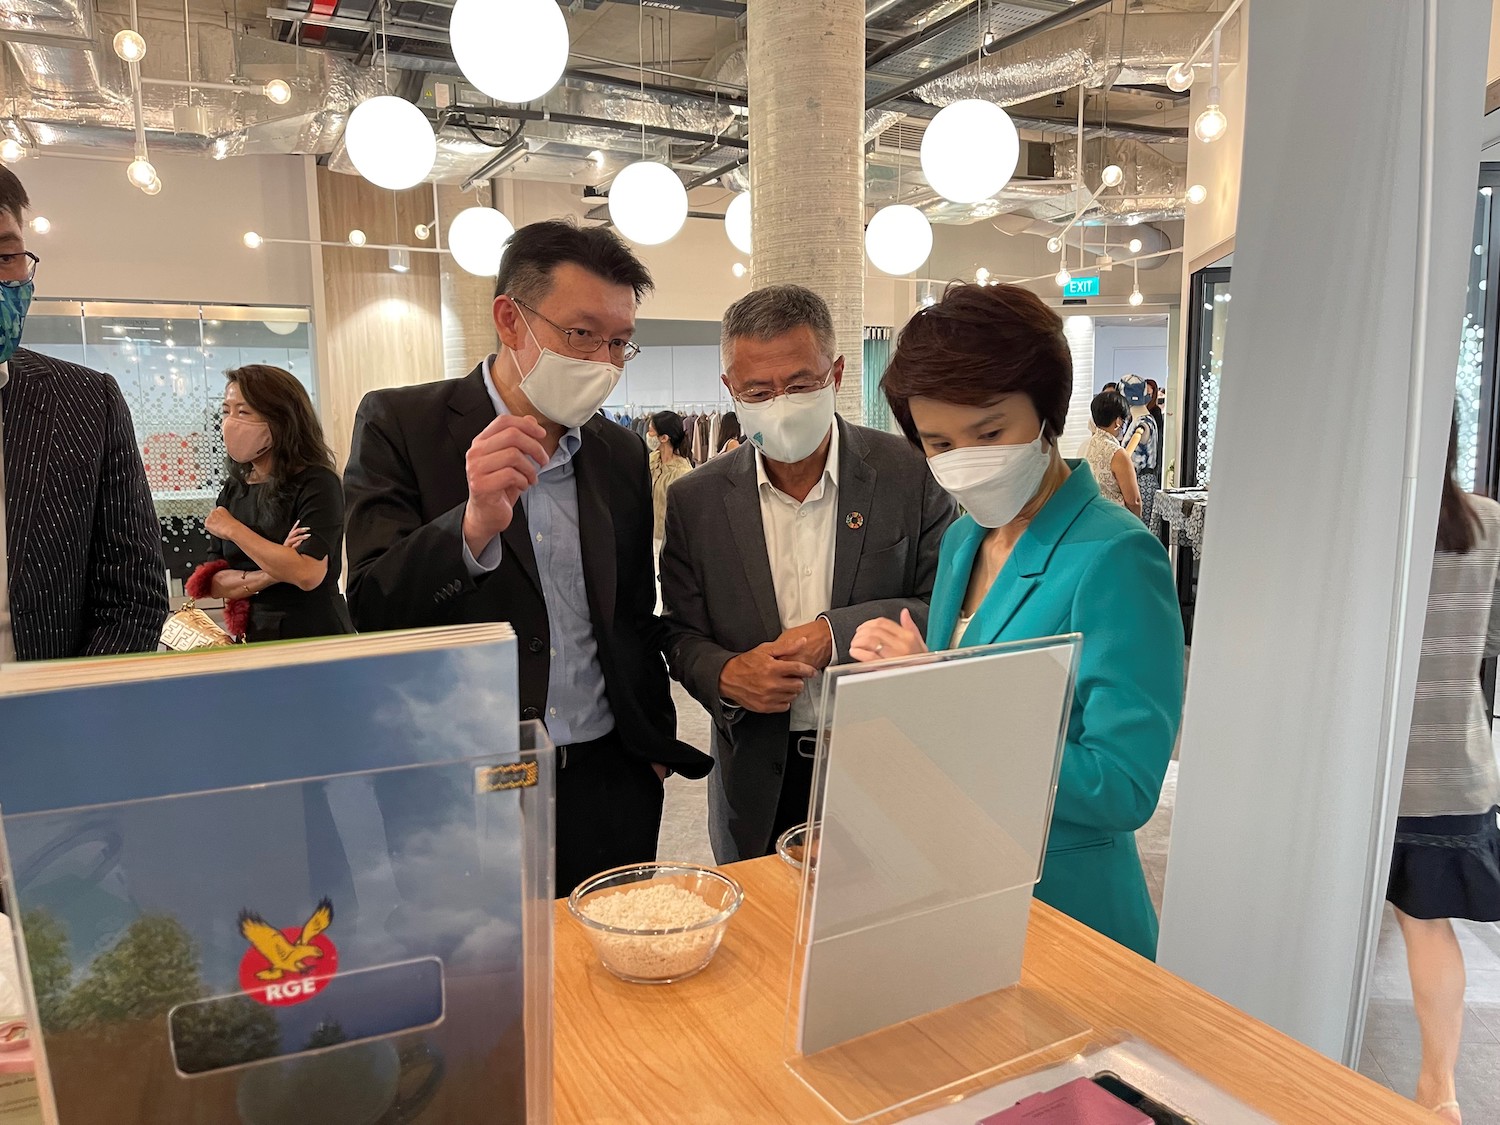 From Left to Right: Tey Wei Lin, RGE President, Bey Soo Khiang, RGE Vice-Chairman, and Low Yen Ling, Minister of State for Trade & Industry and Culture, Community, interacting with RGE's raw materials display at launch event. © RGE